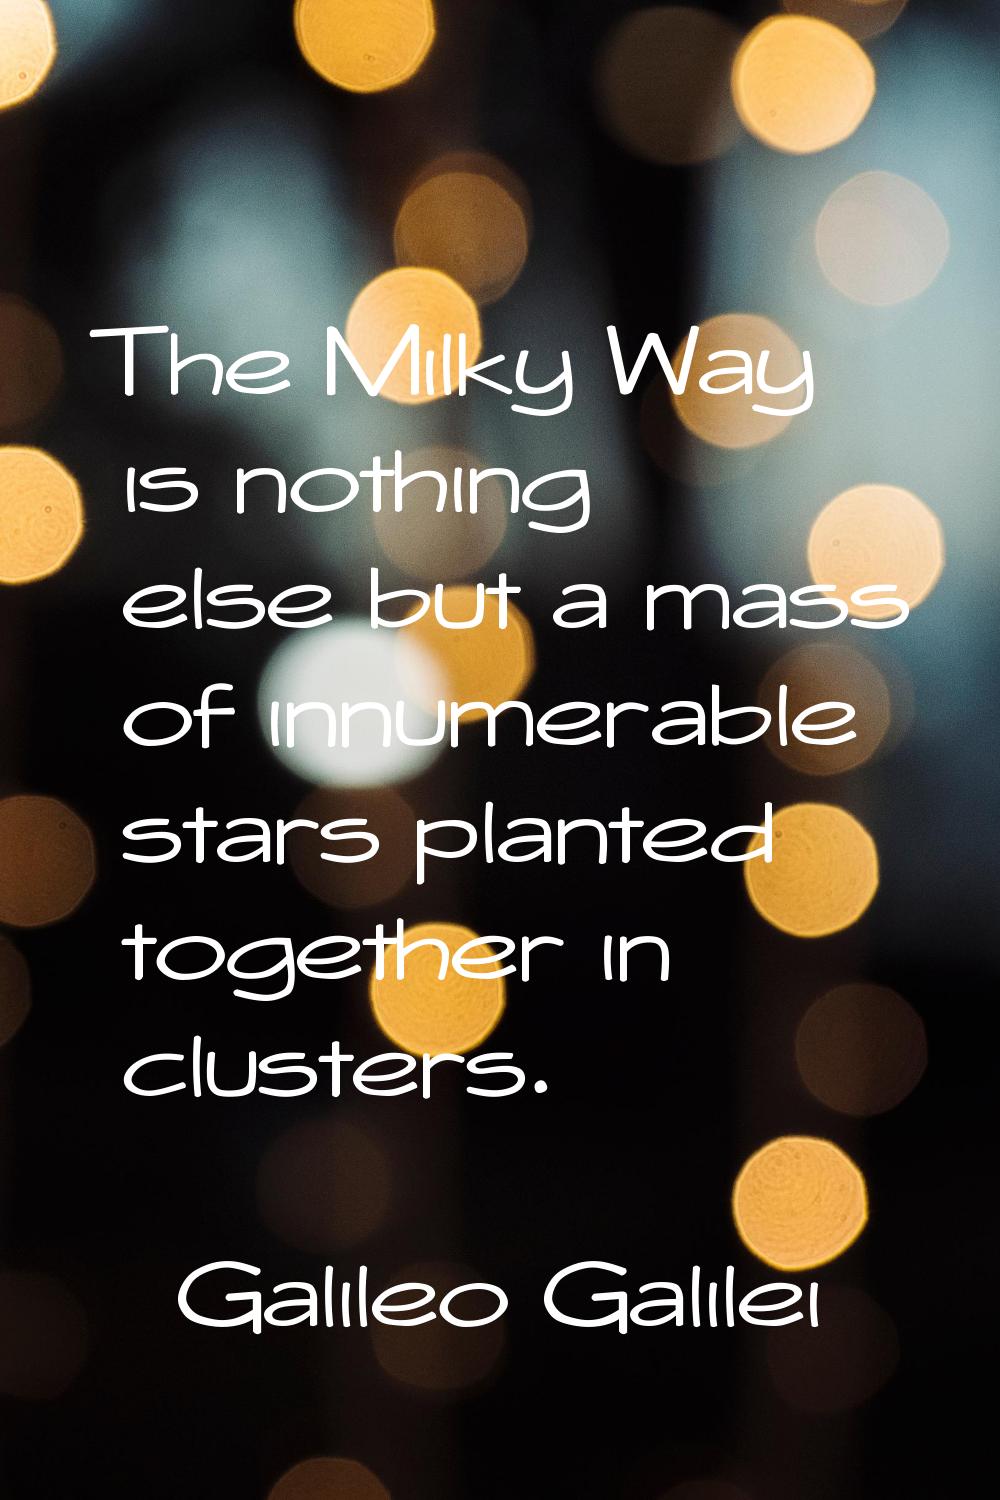 The Milky Way is nothing else but a mass of innumerable stars planted together in clusters.